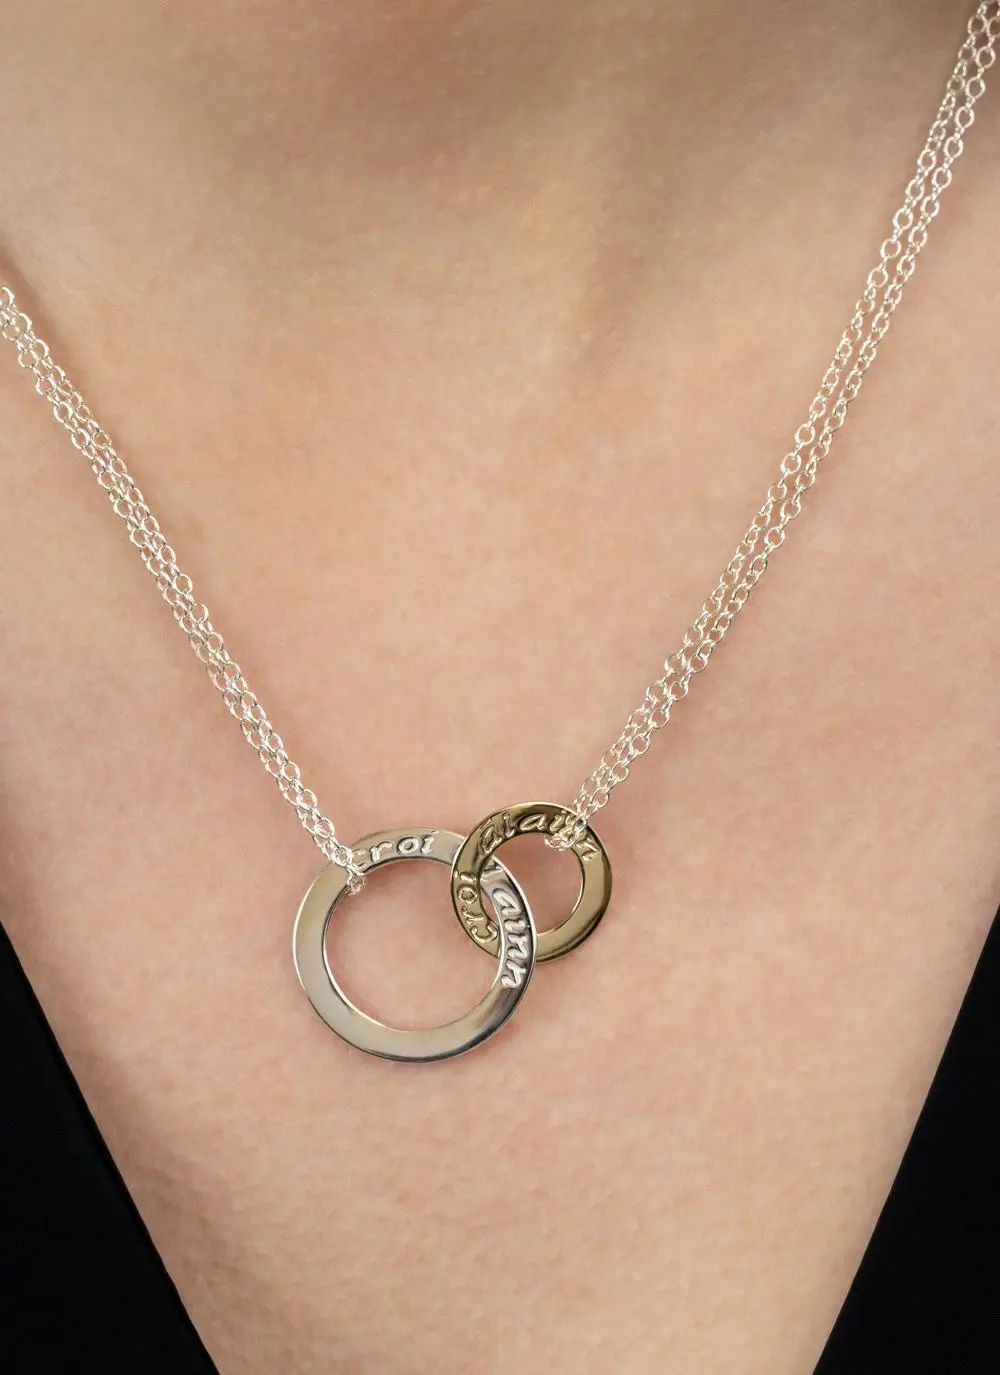 9ct Gold Engravable Round Pendant Necklace 16 - 20 Inches Chain |  Jewellerybox.co.uk